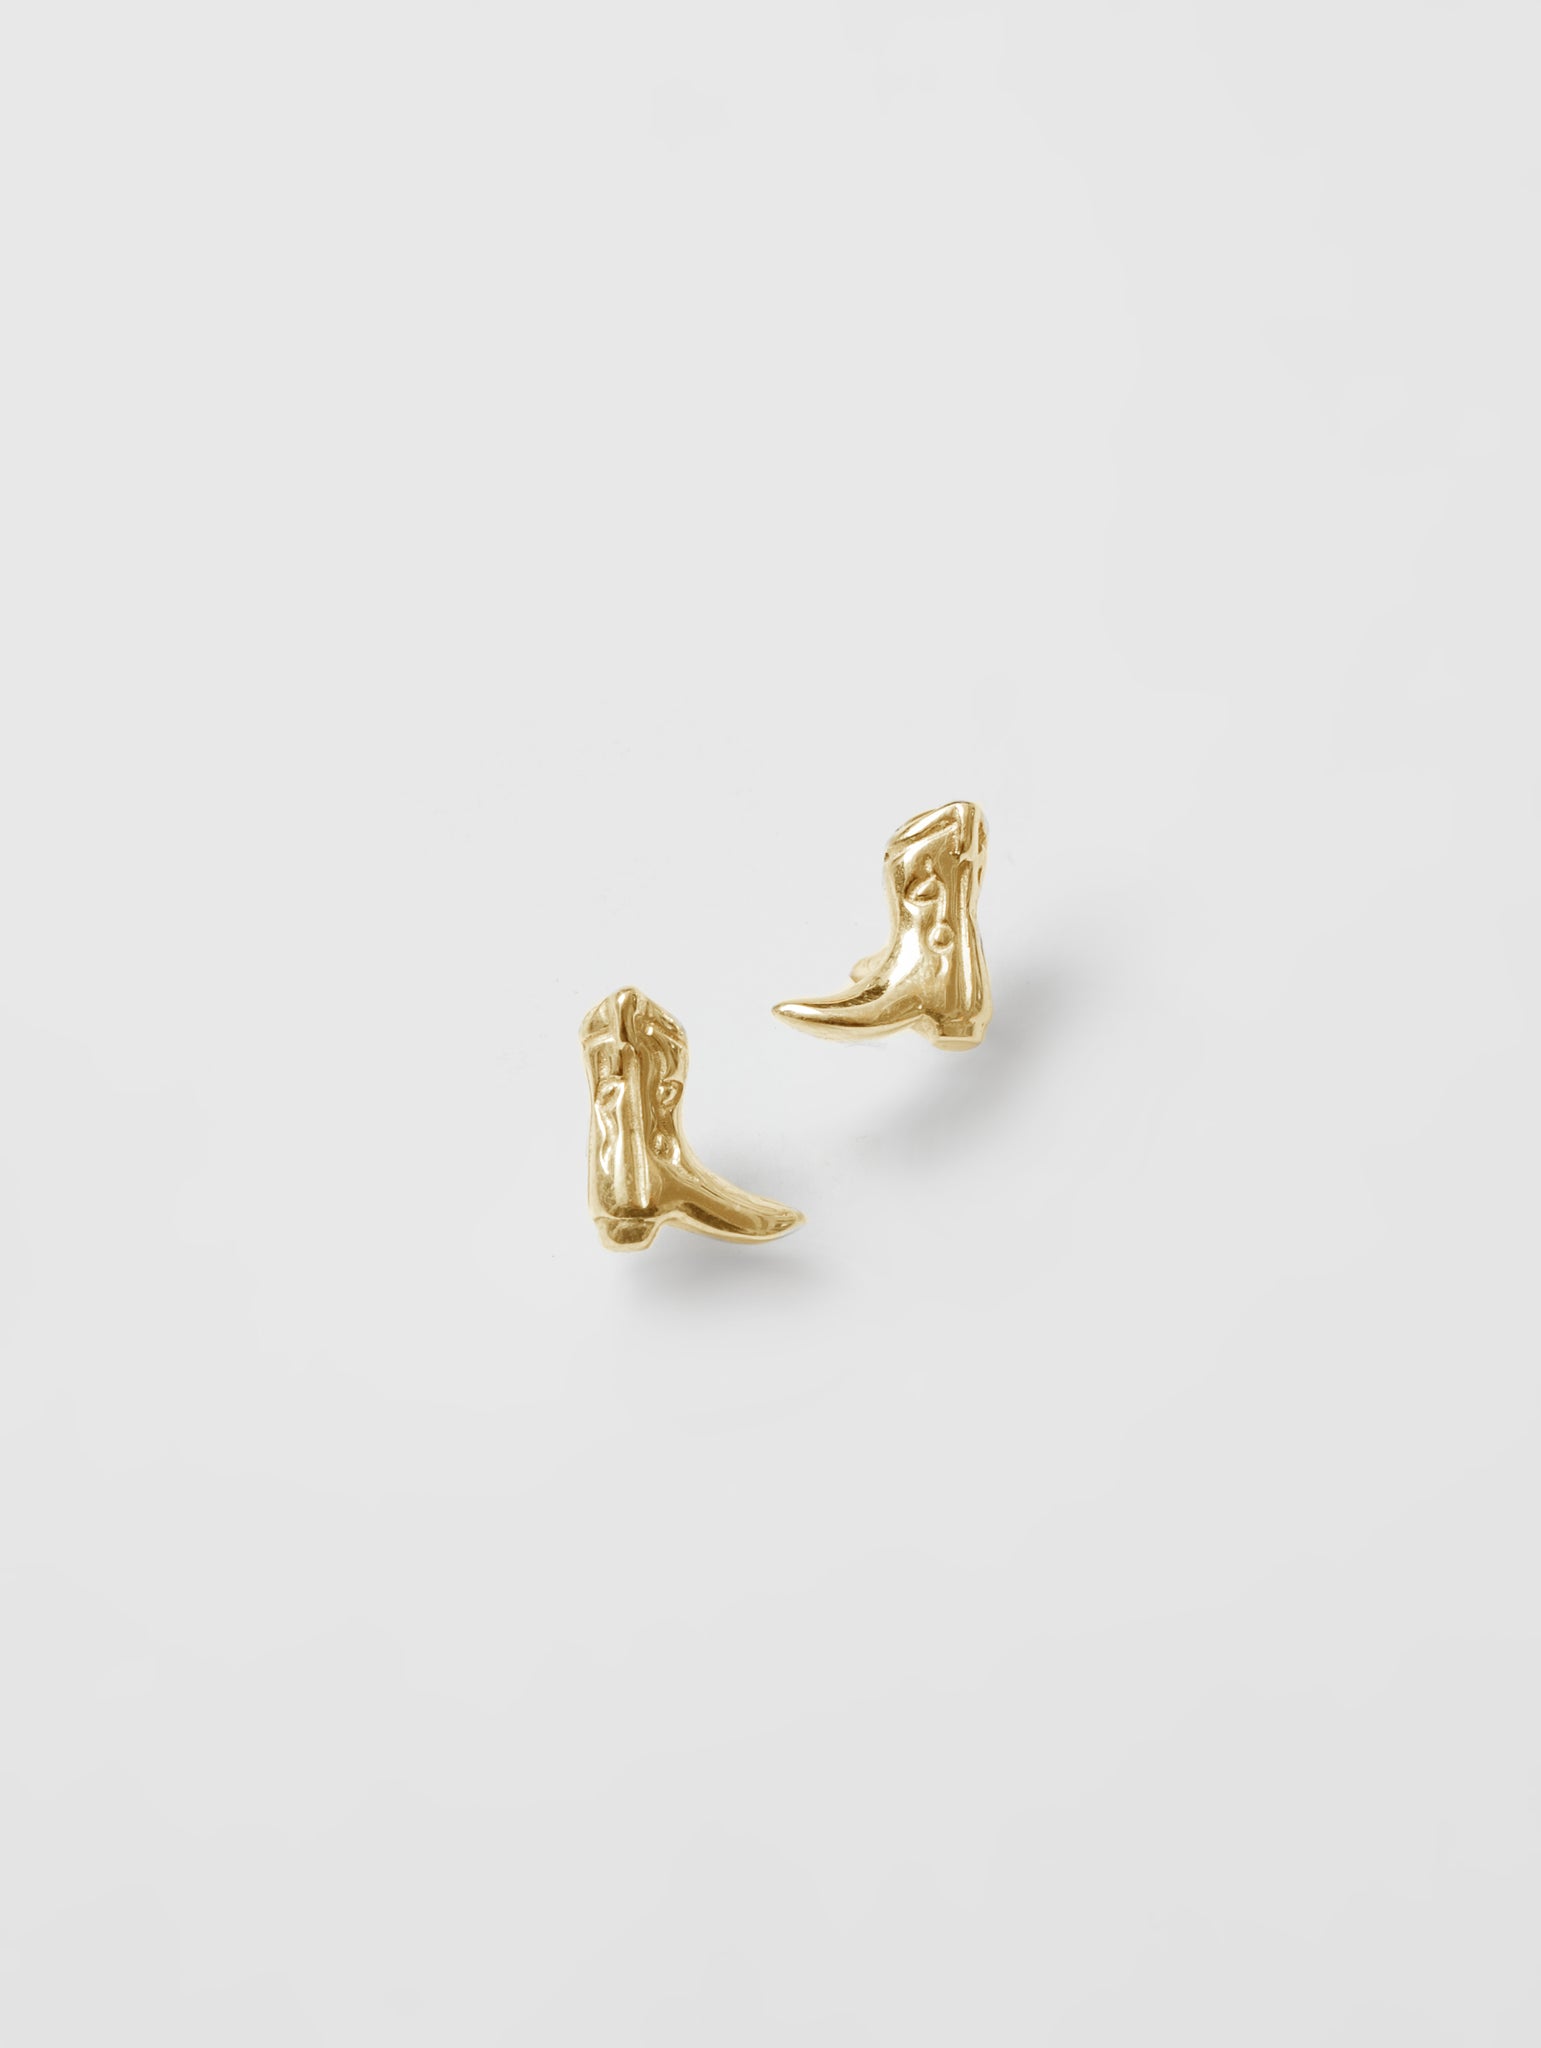 Cowboy Boot Charm Studs in Gold